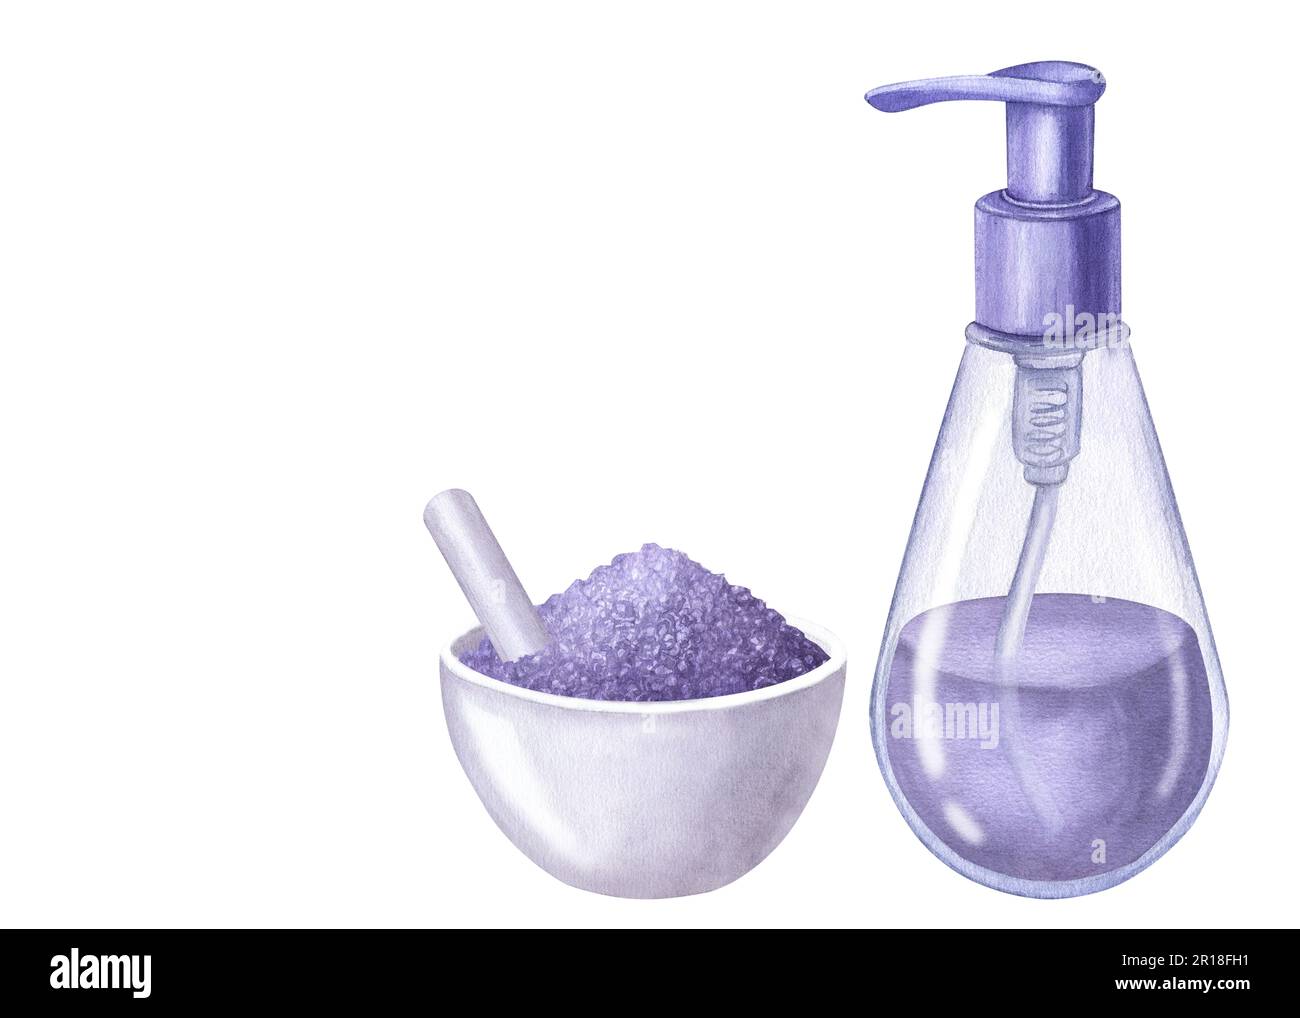 https://c8.alamy.com/comp/2R18FH1/white-mortar-with-lavender-sea-salt-bowl-and-pestle-purple-dispenser-bottle-plastic-glass-cosmetic-hand-draw-watercolor-illustration-isolated-on-wh-2R18FH1.jpg